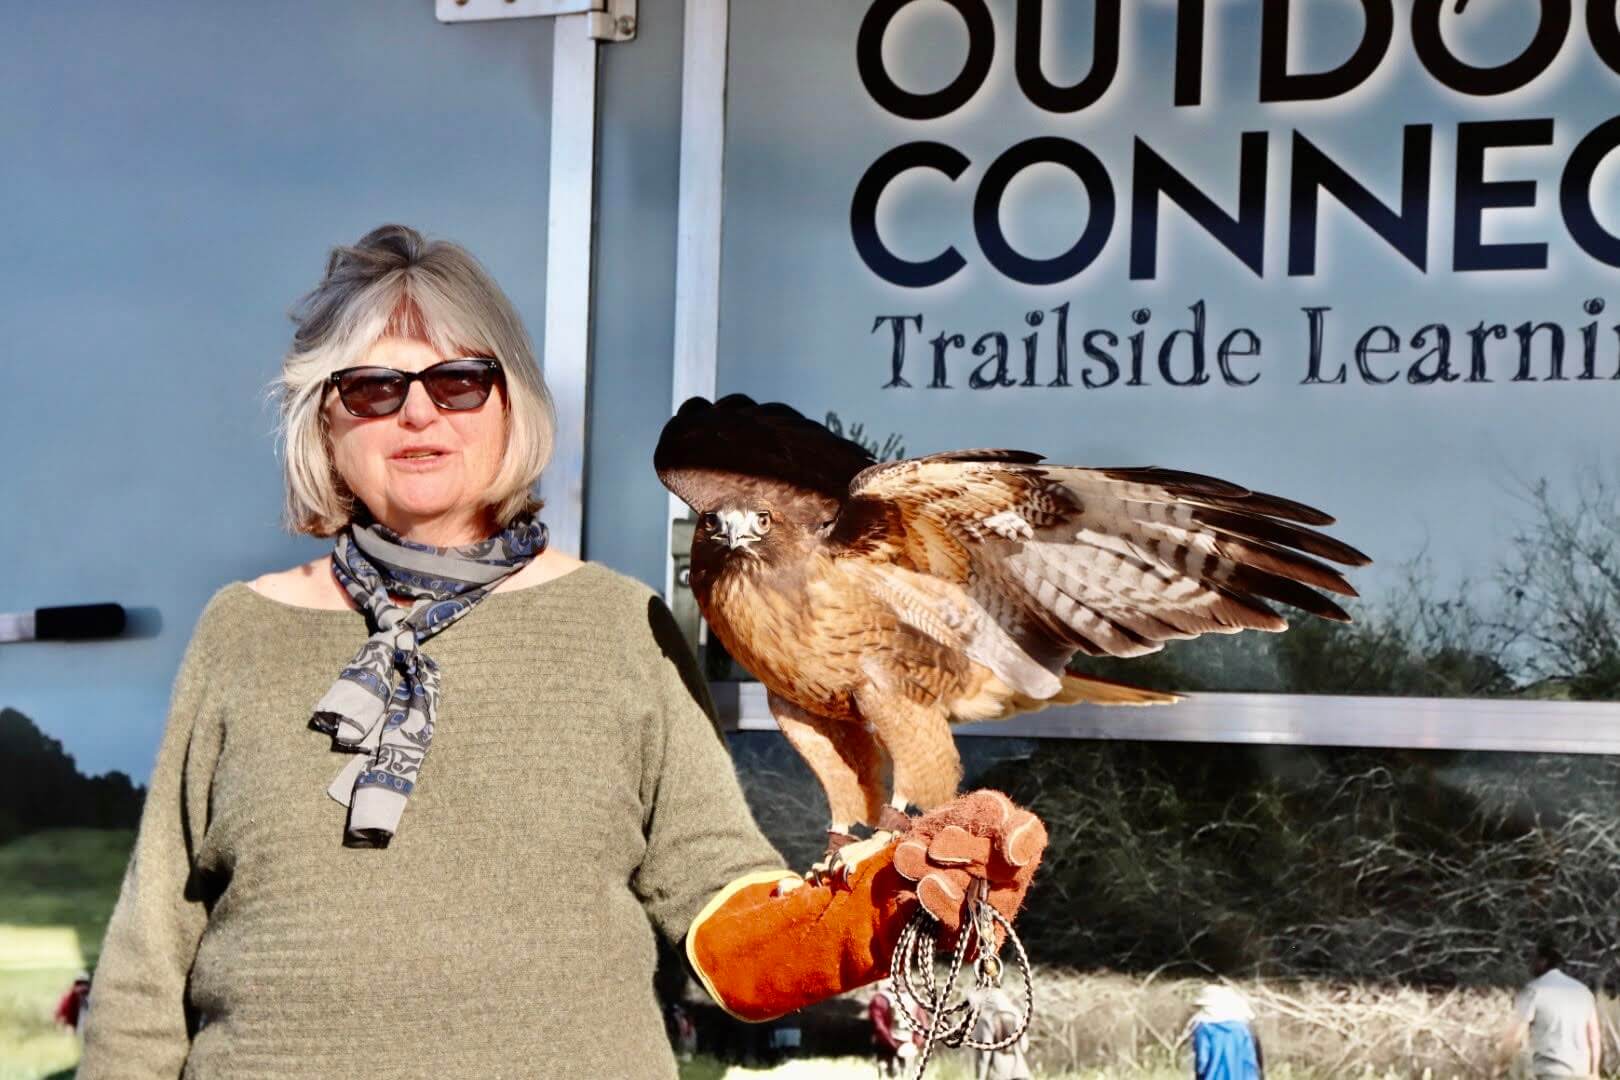 Wildlife Rescue volunteer with a red-tailed hawk in front of the Outdoor Connection mobile classroom